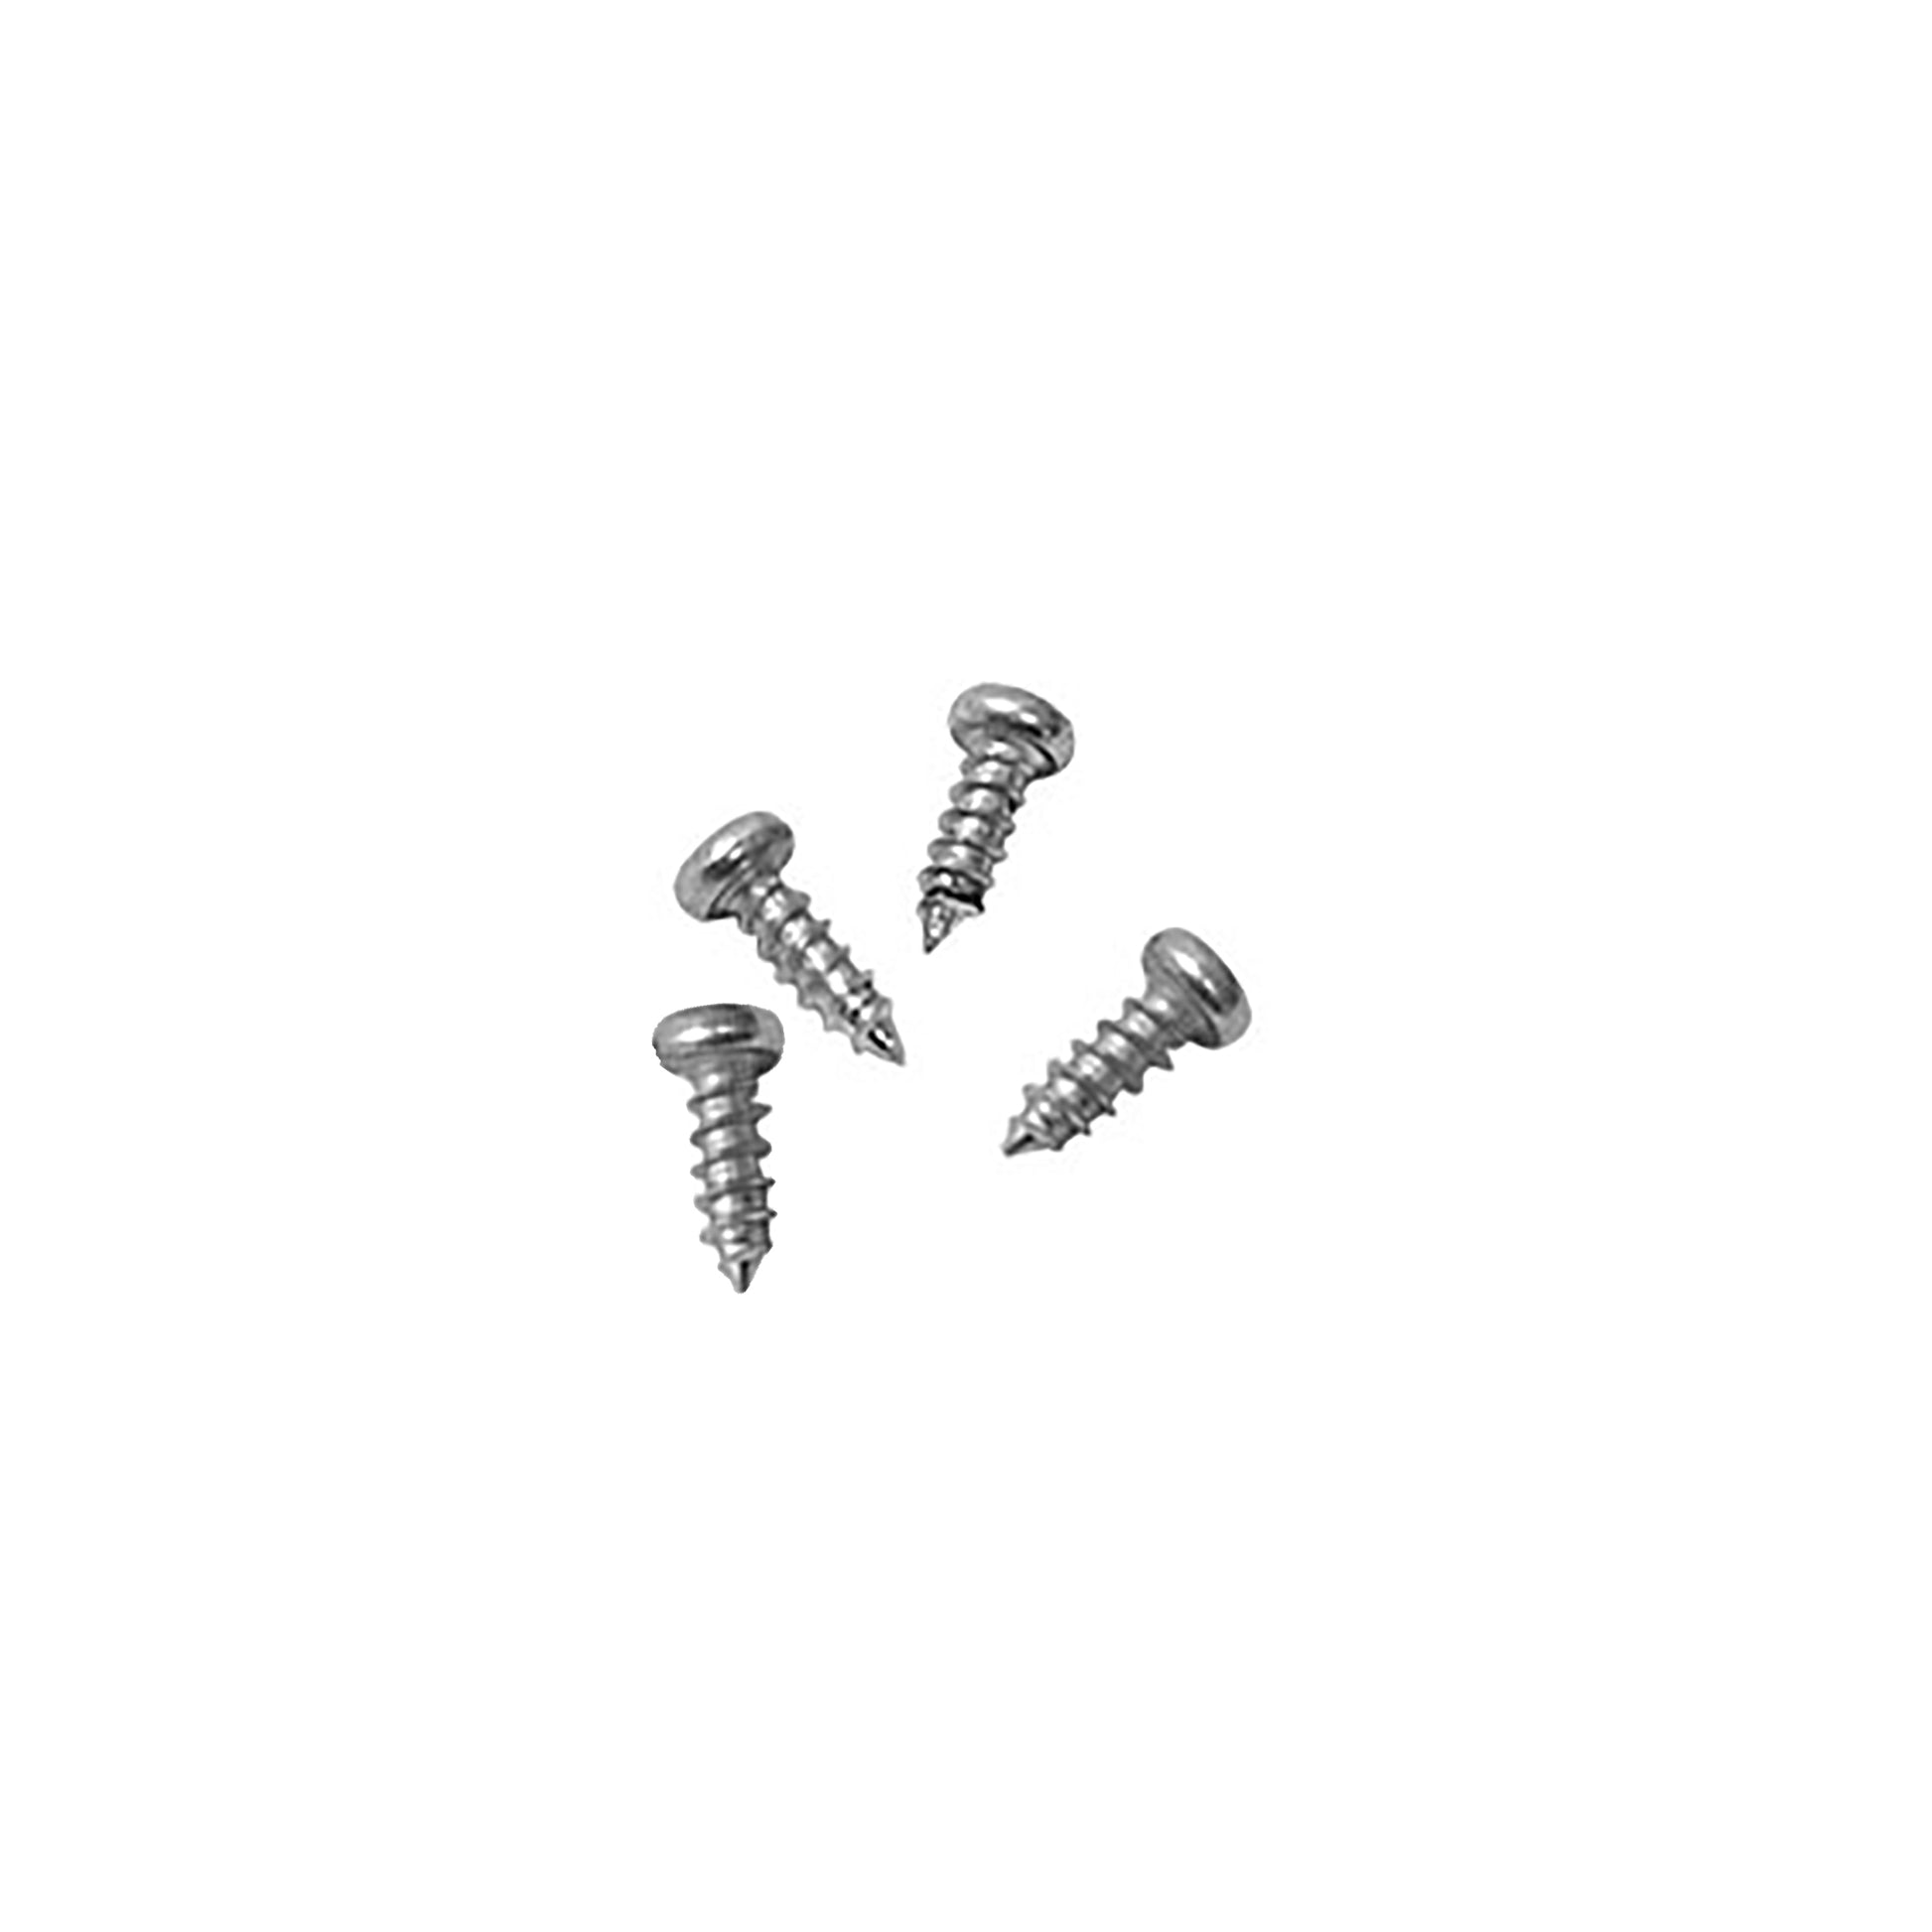 Rubber Feet Screw for Rubber Feet Assembly for BR-282A Inflatable Blower